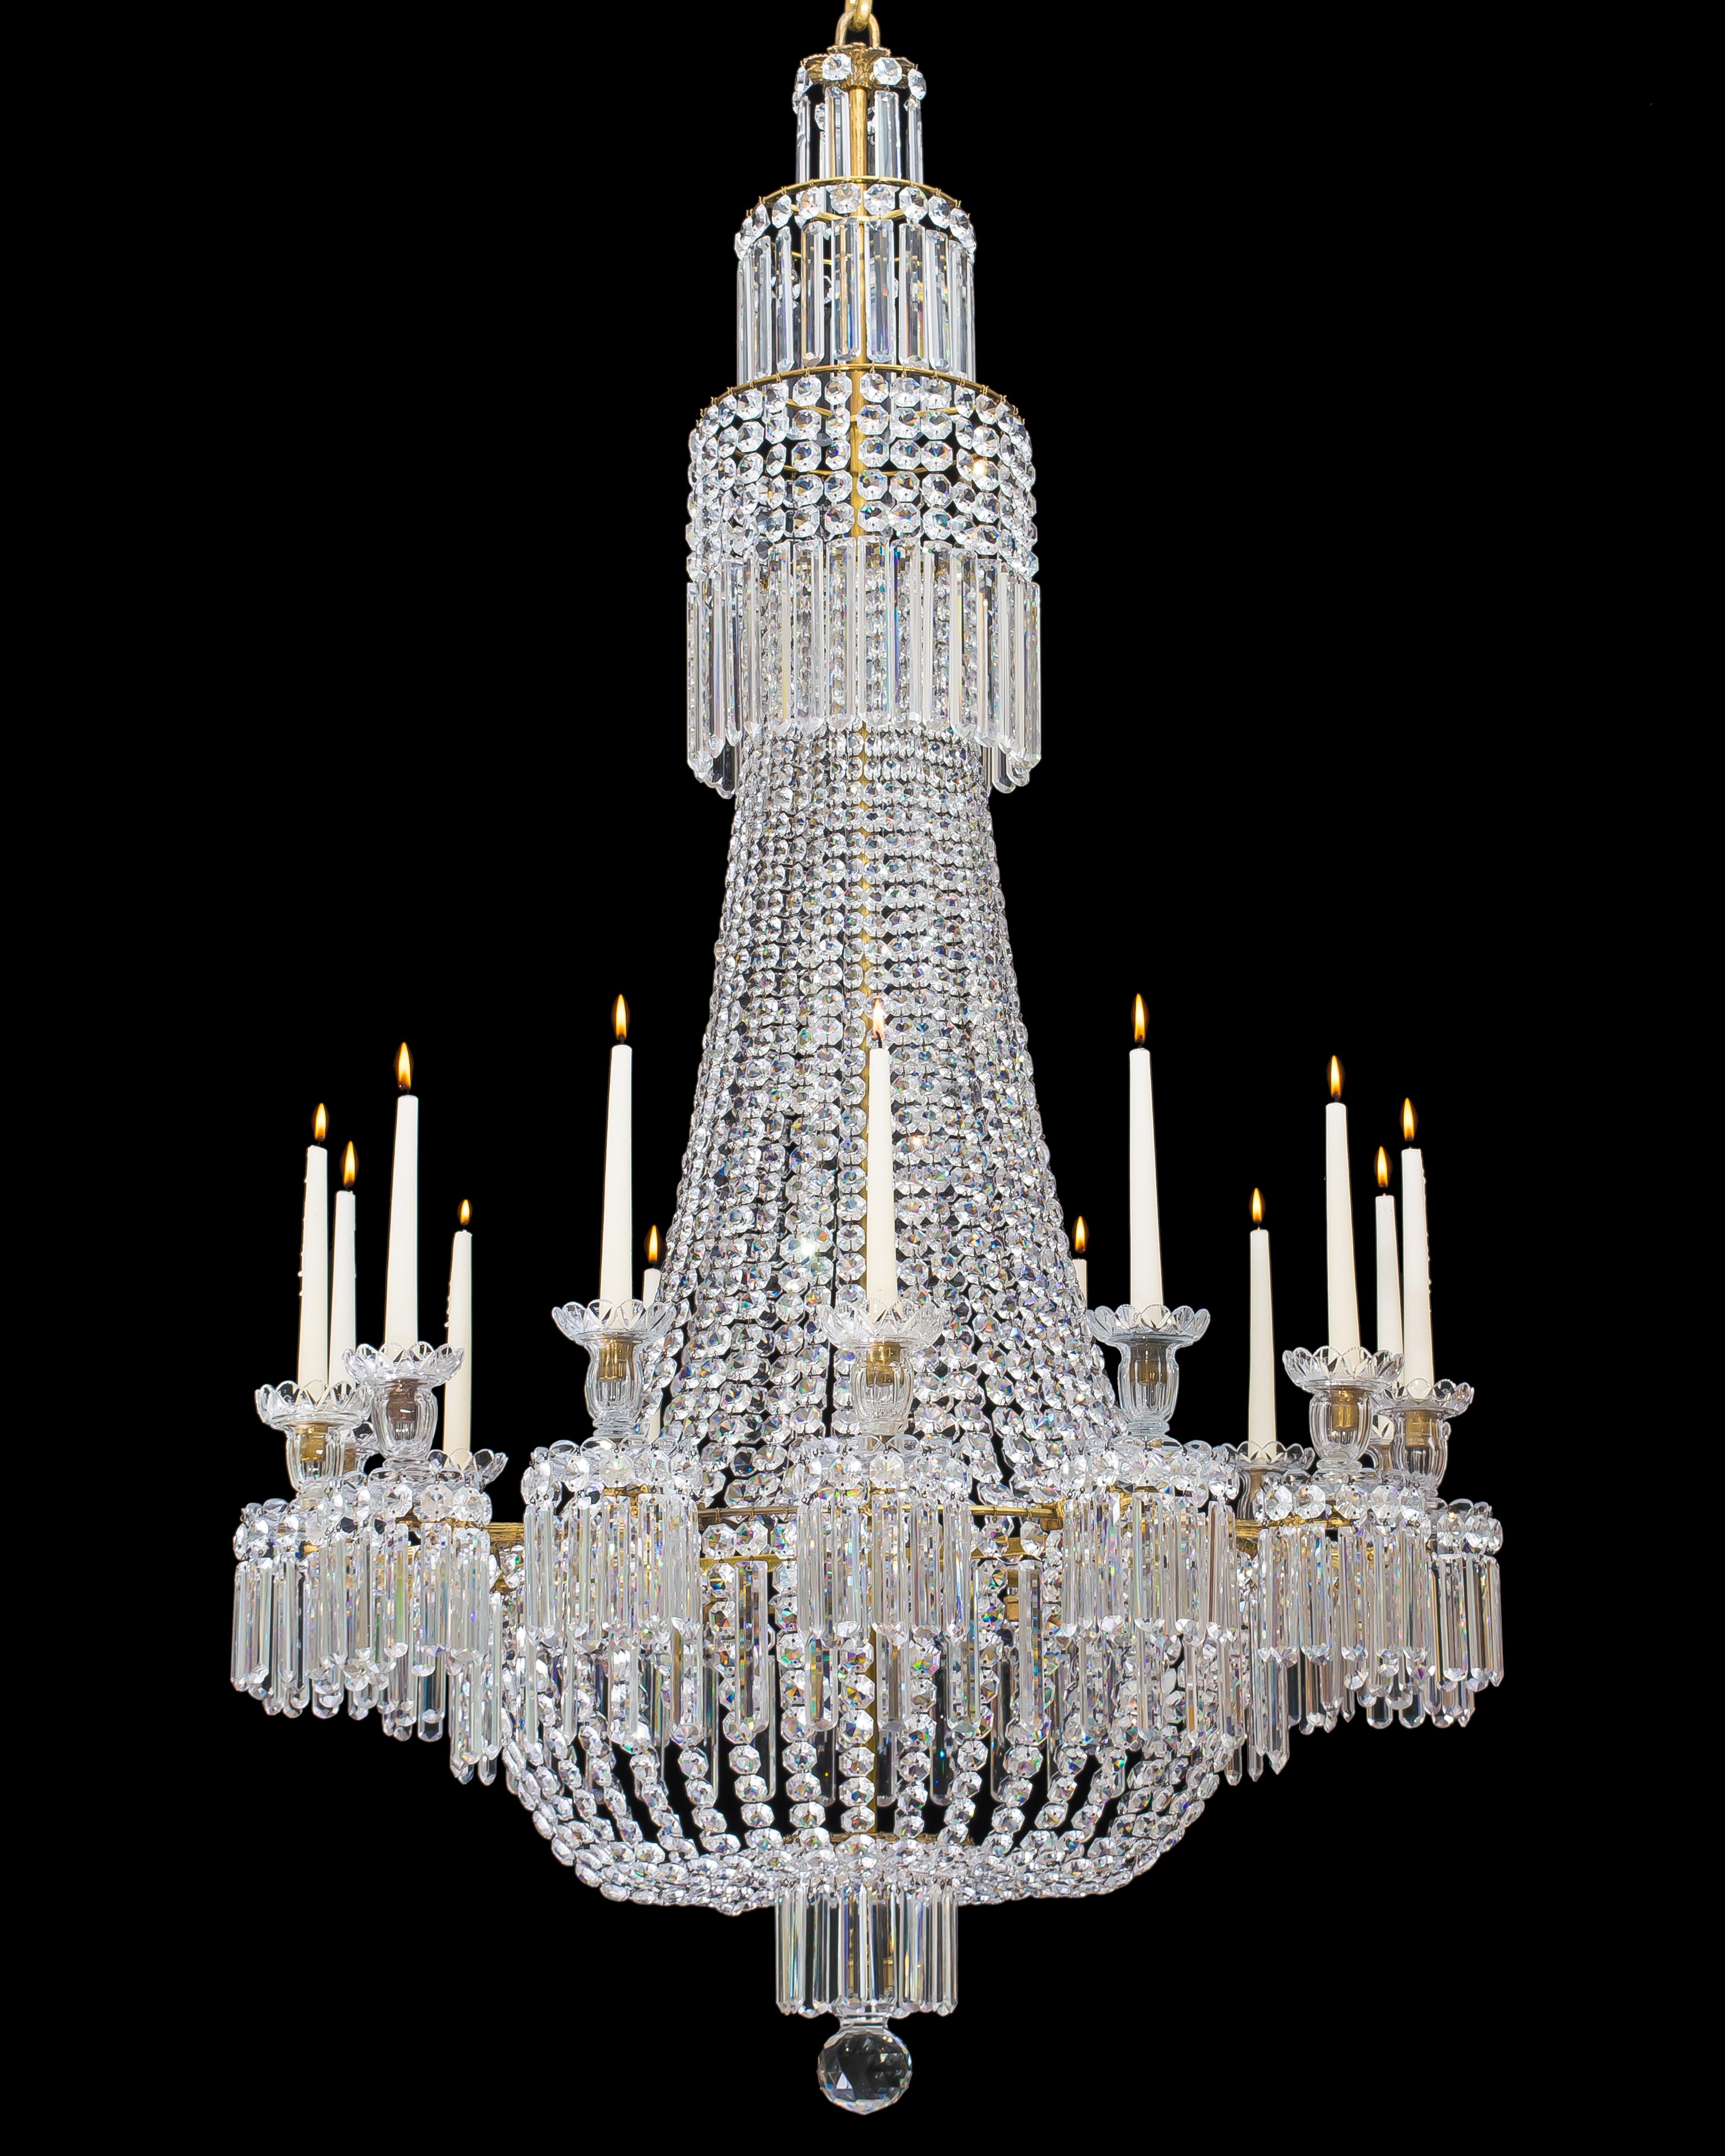 Regency Crystal Chandelier of Classic Tent and Basket Design by John Blades 1